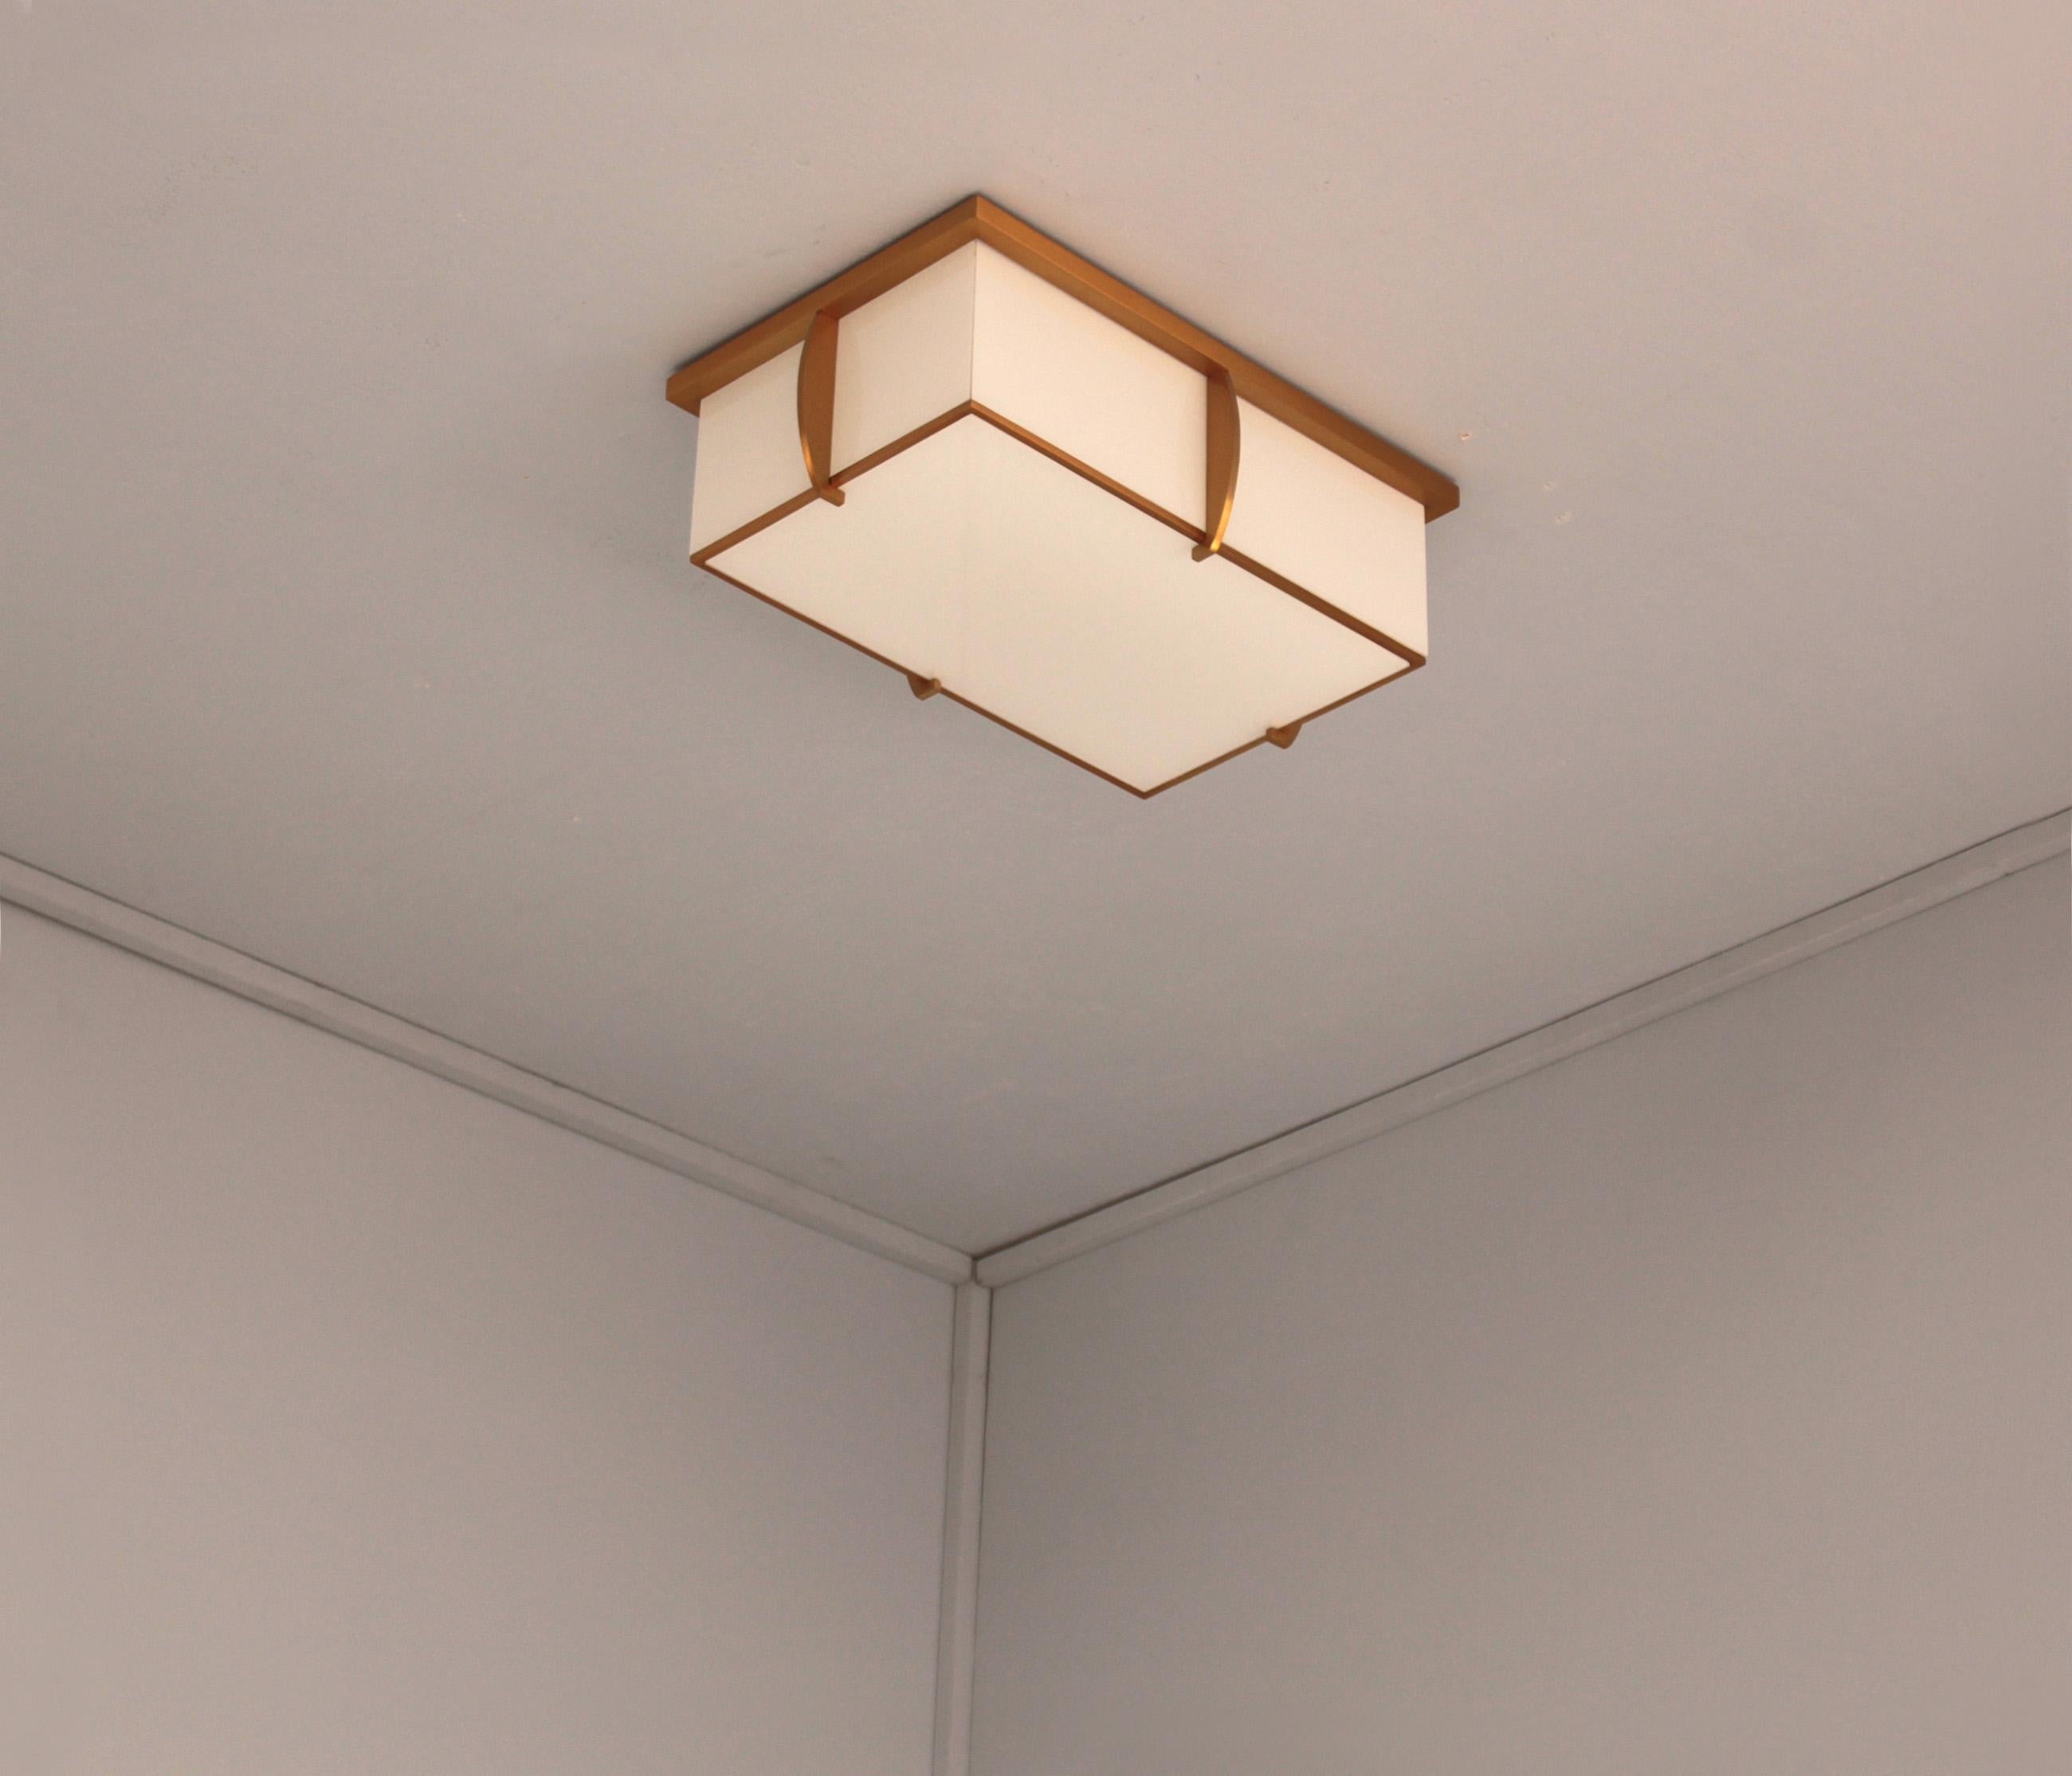 Mounted on a gold lacquered bronze frame that holds the white laminated glass diffusers. The flat bottom glass diffuser is removable in order to change the bulbs.
Signed